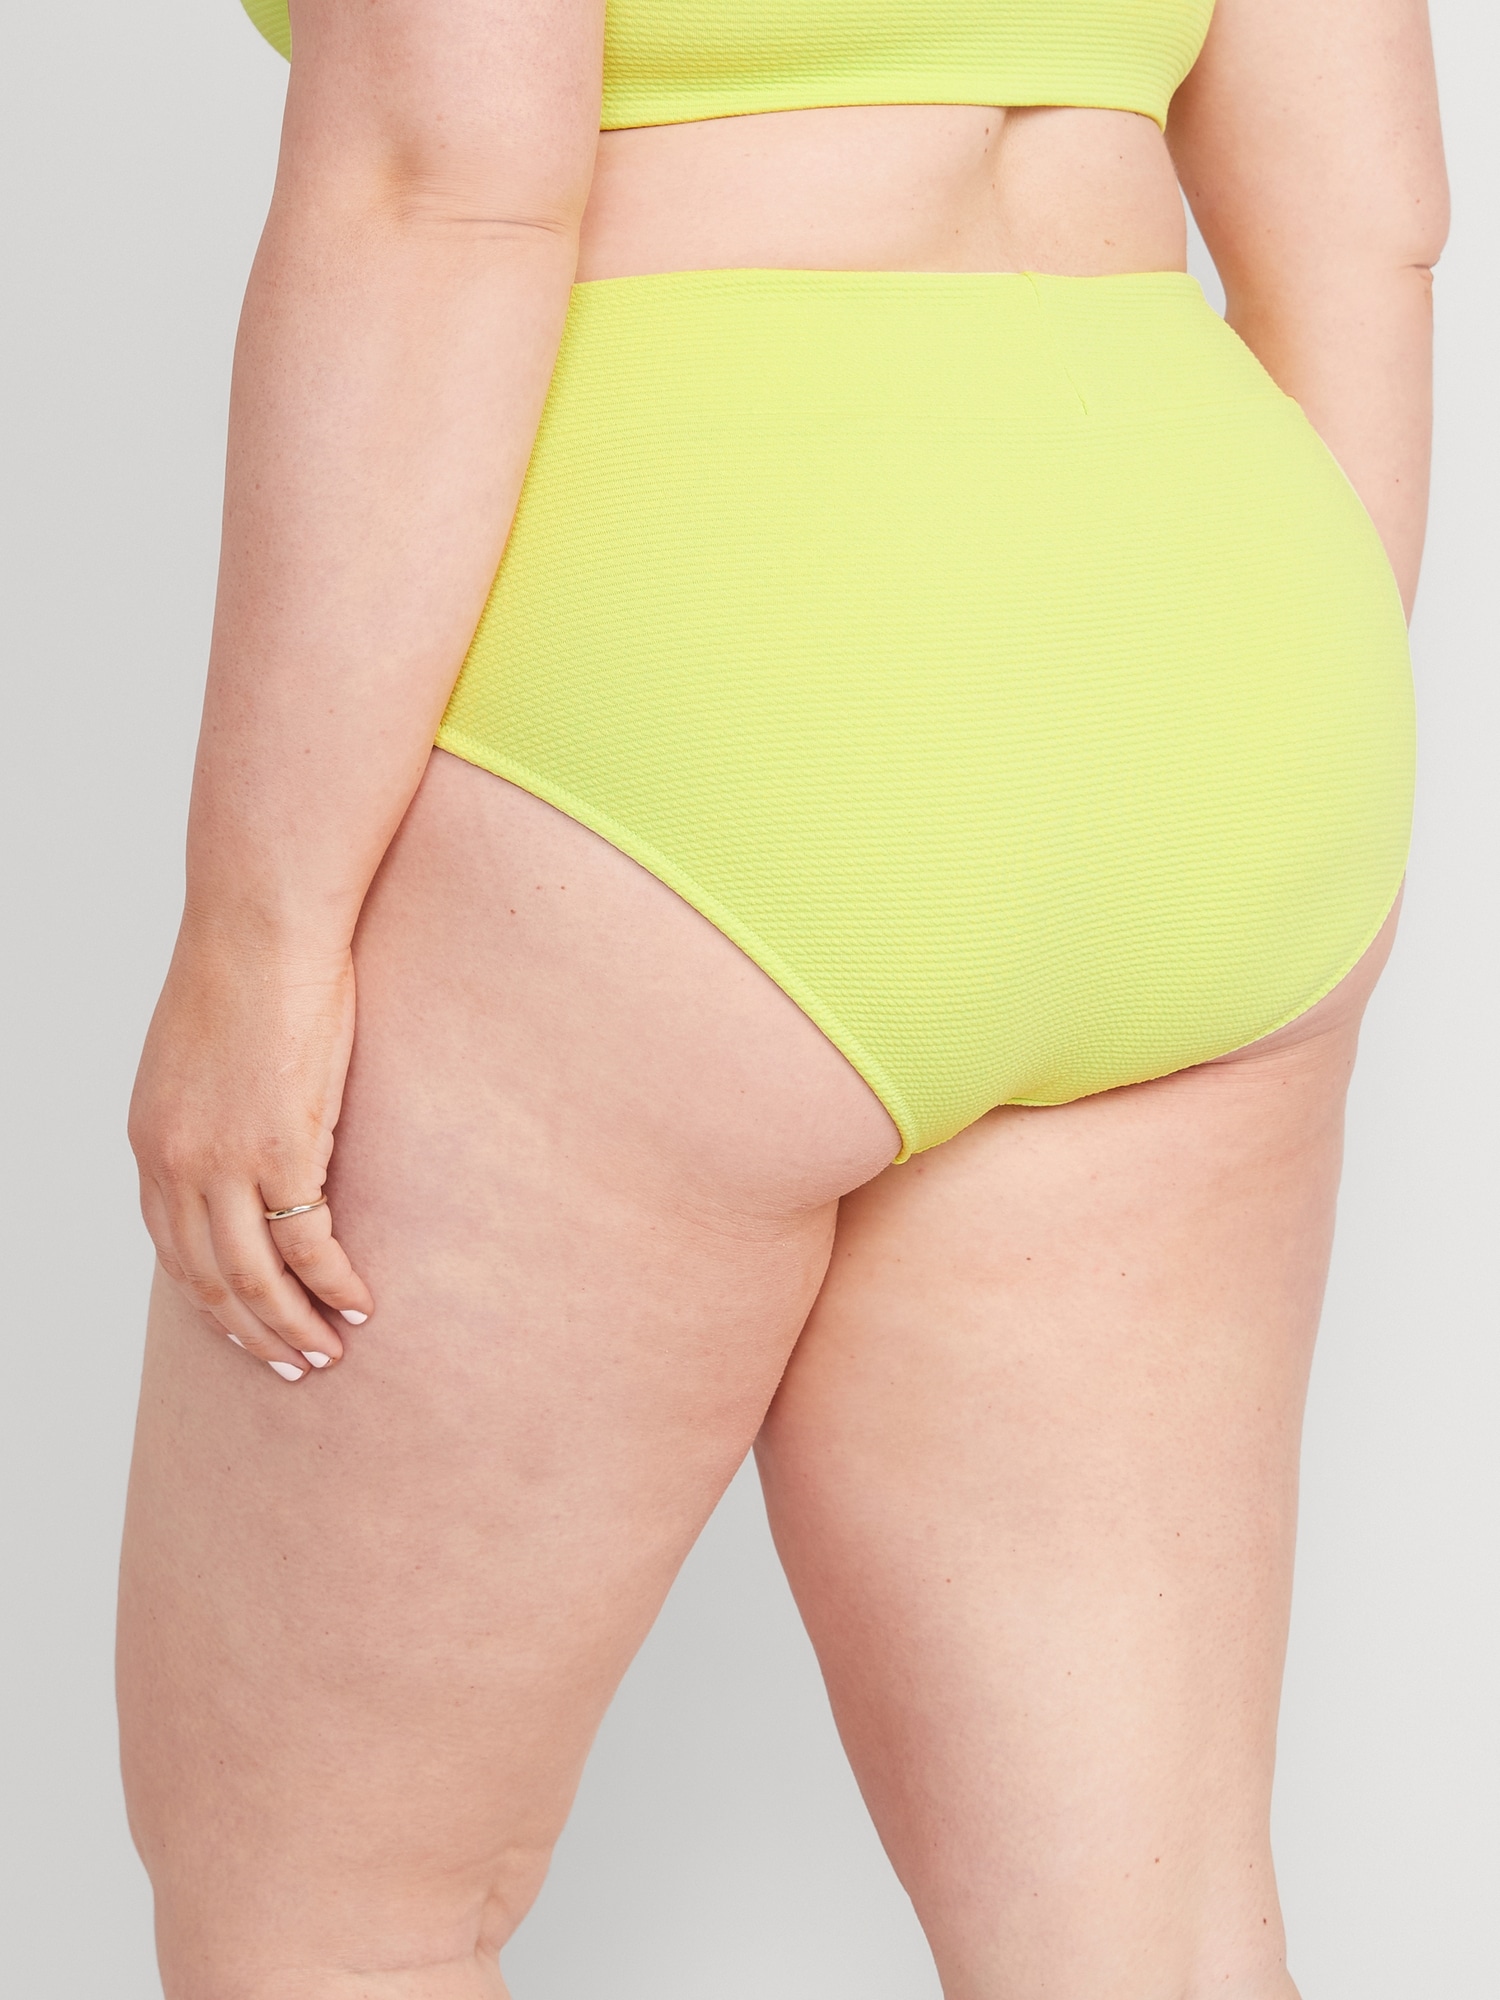 Old Navy High-Waisted Boyshort Swim Bottoms, 13 Old Navy Bottoms That Come  Up So High, They'll Practically Kiss Your Bikini Top